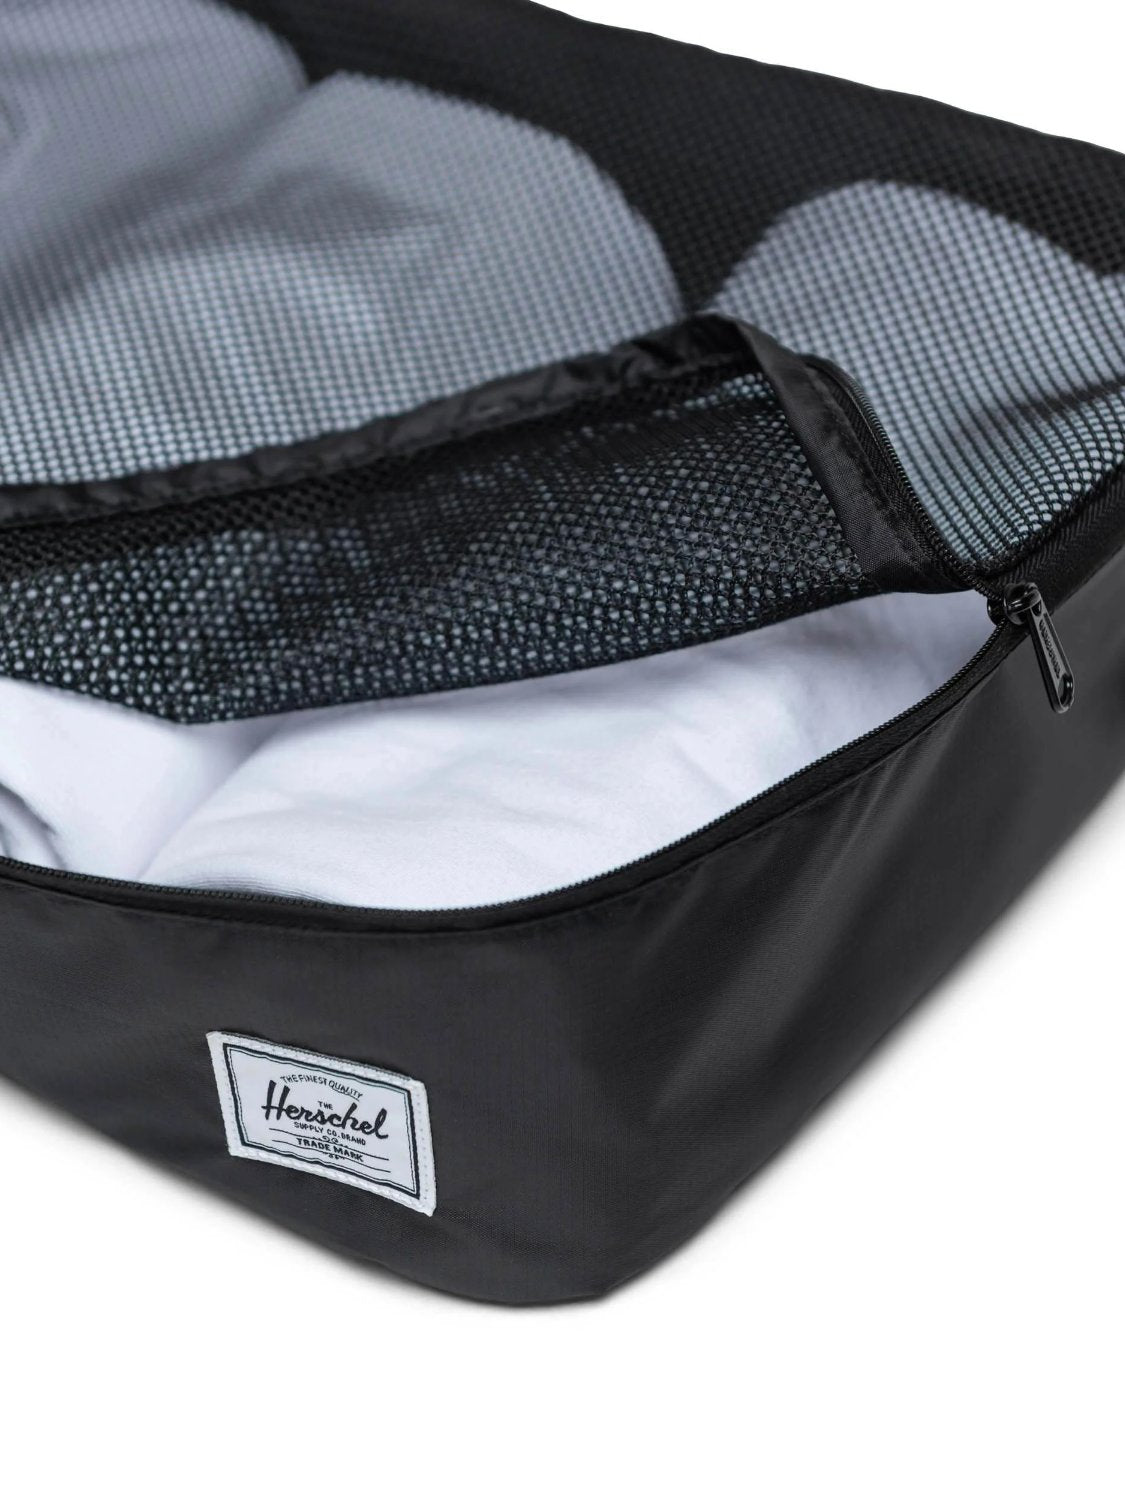 HSC KYOTO PACKING CUBES BLACK